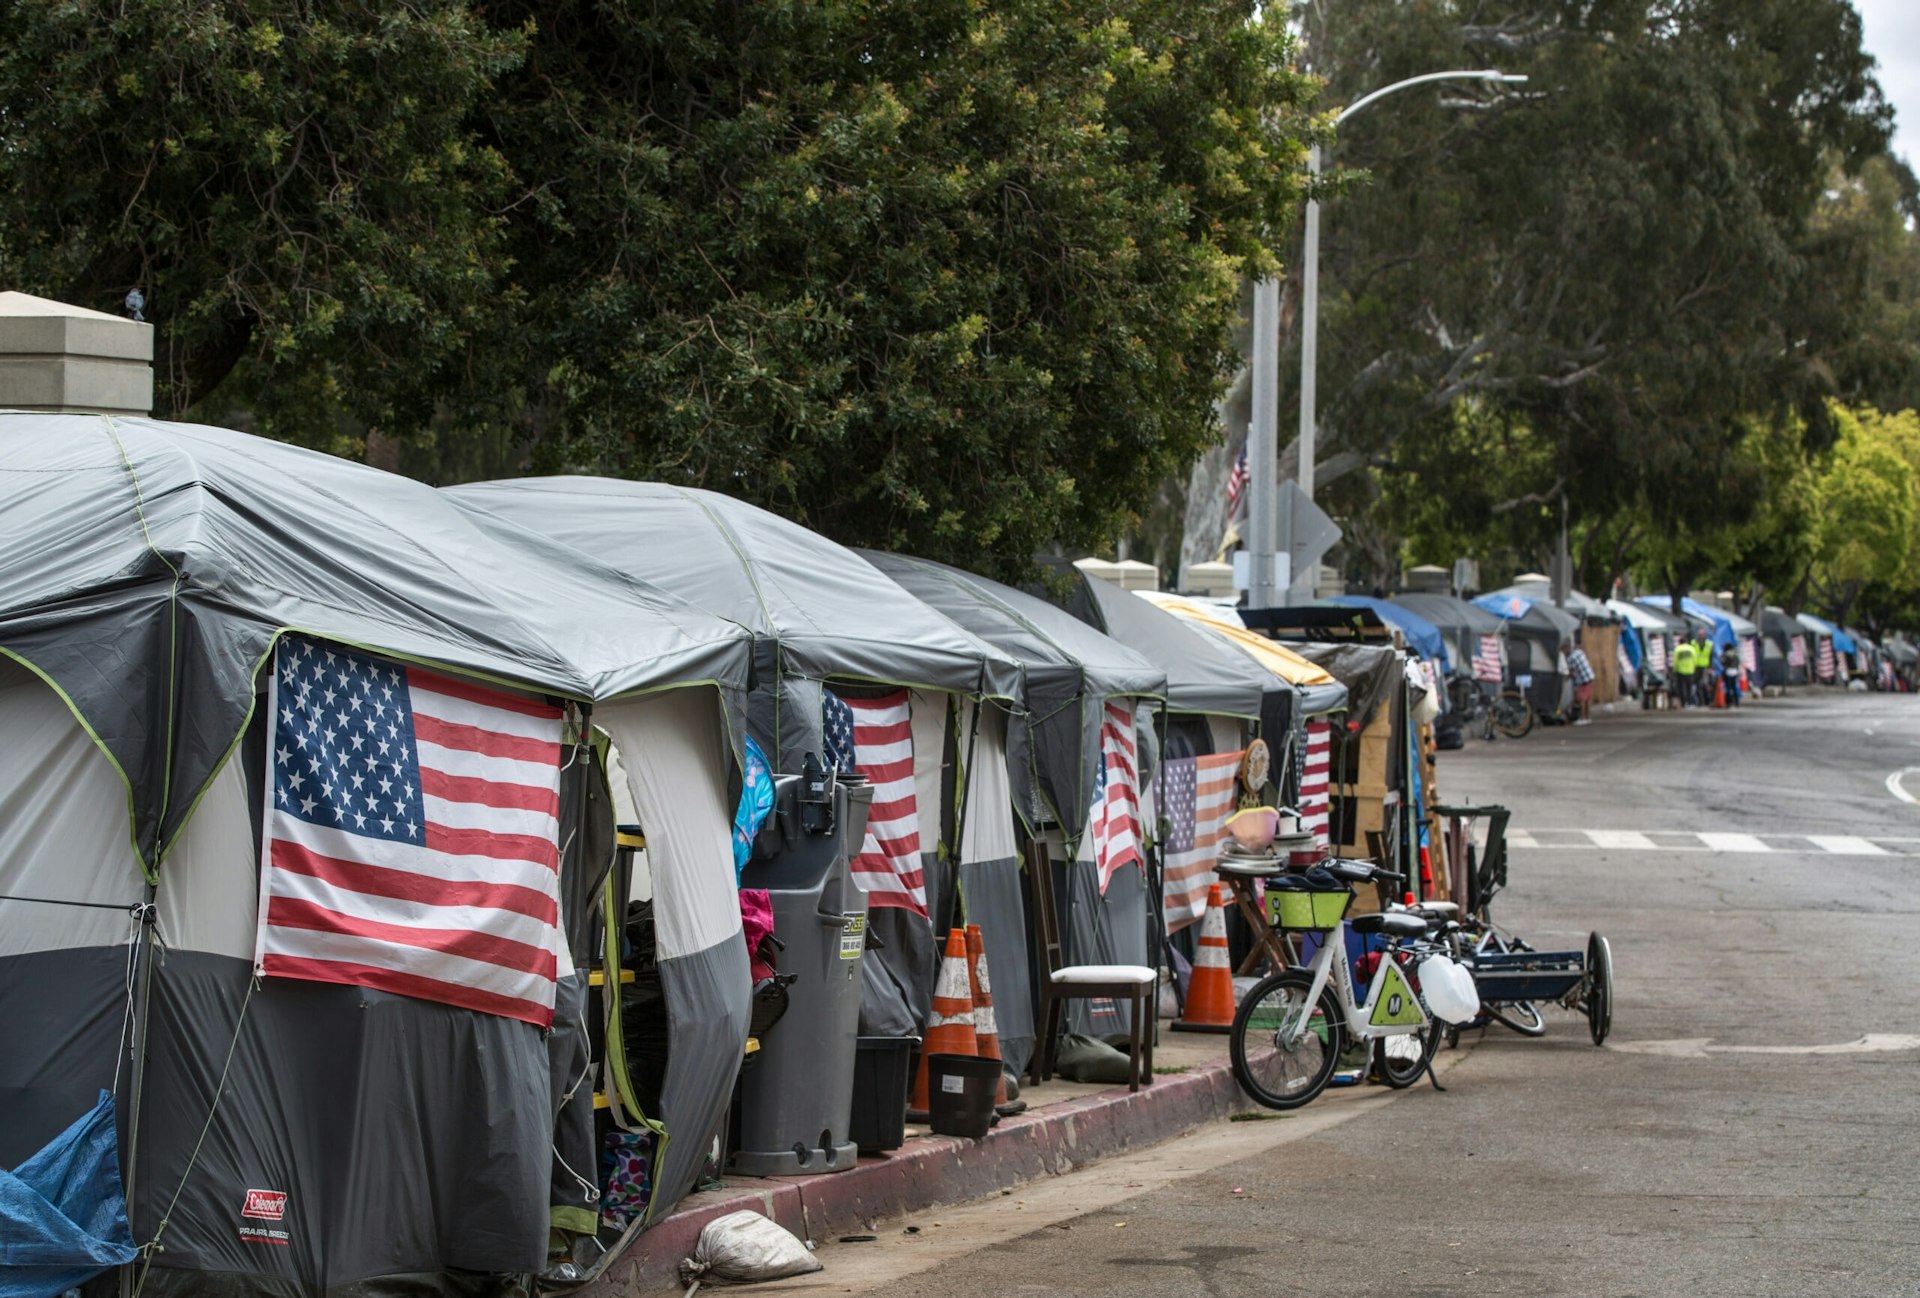 Dozens of tents adorned with American flags line San Vicente Boulevard in Los Angeles.